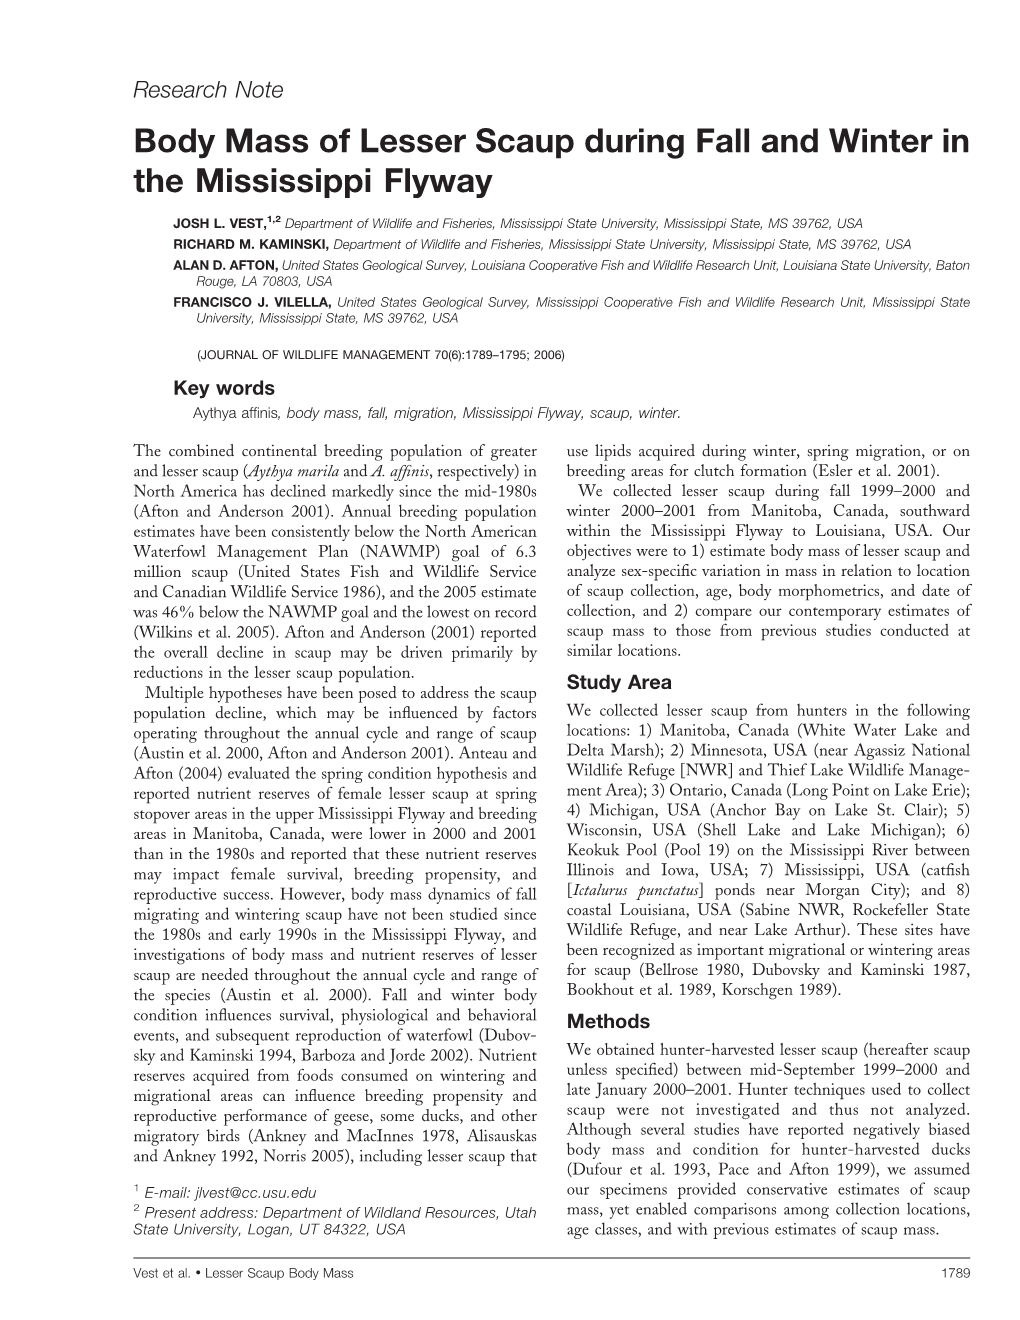 Body Mass of Lesser Scaup During Fall and Winter in the Mississippi Flyway